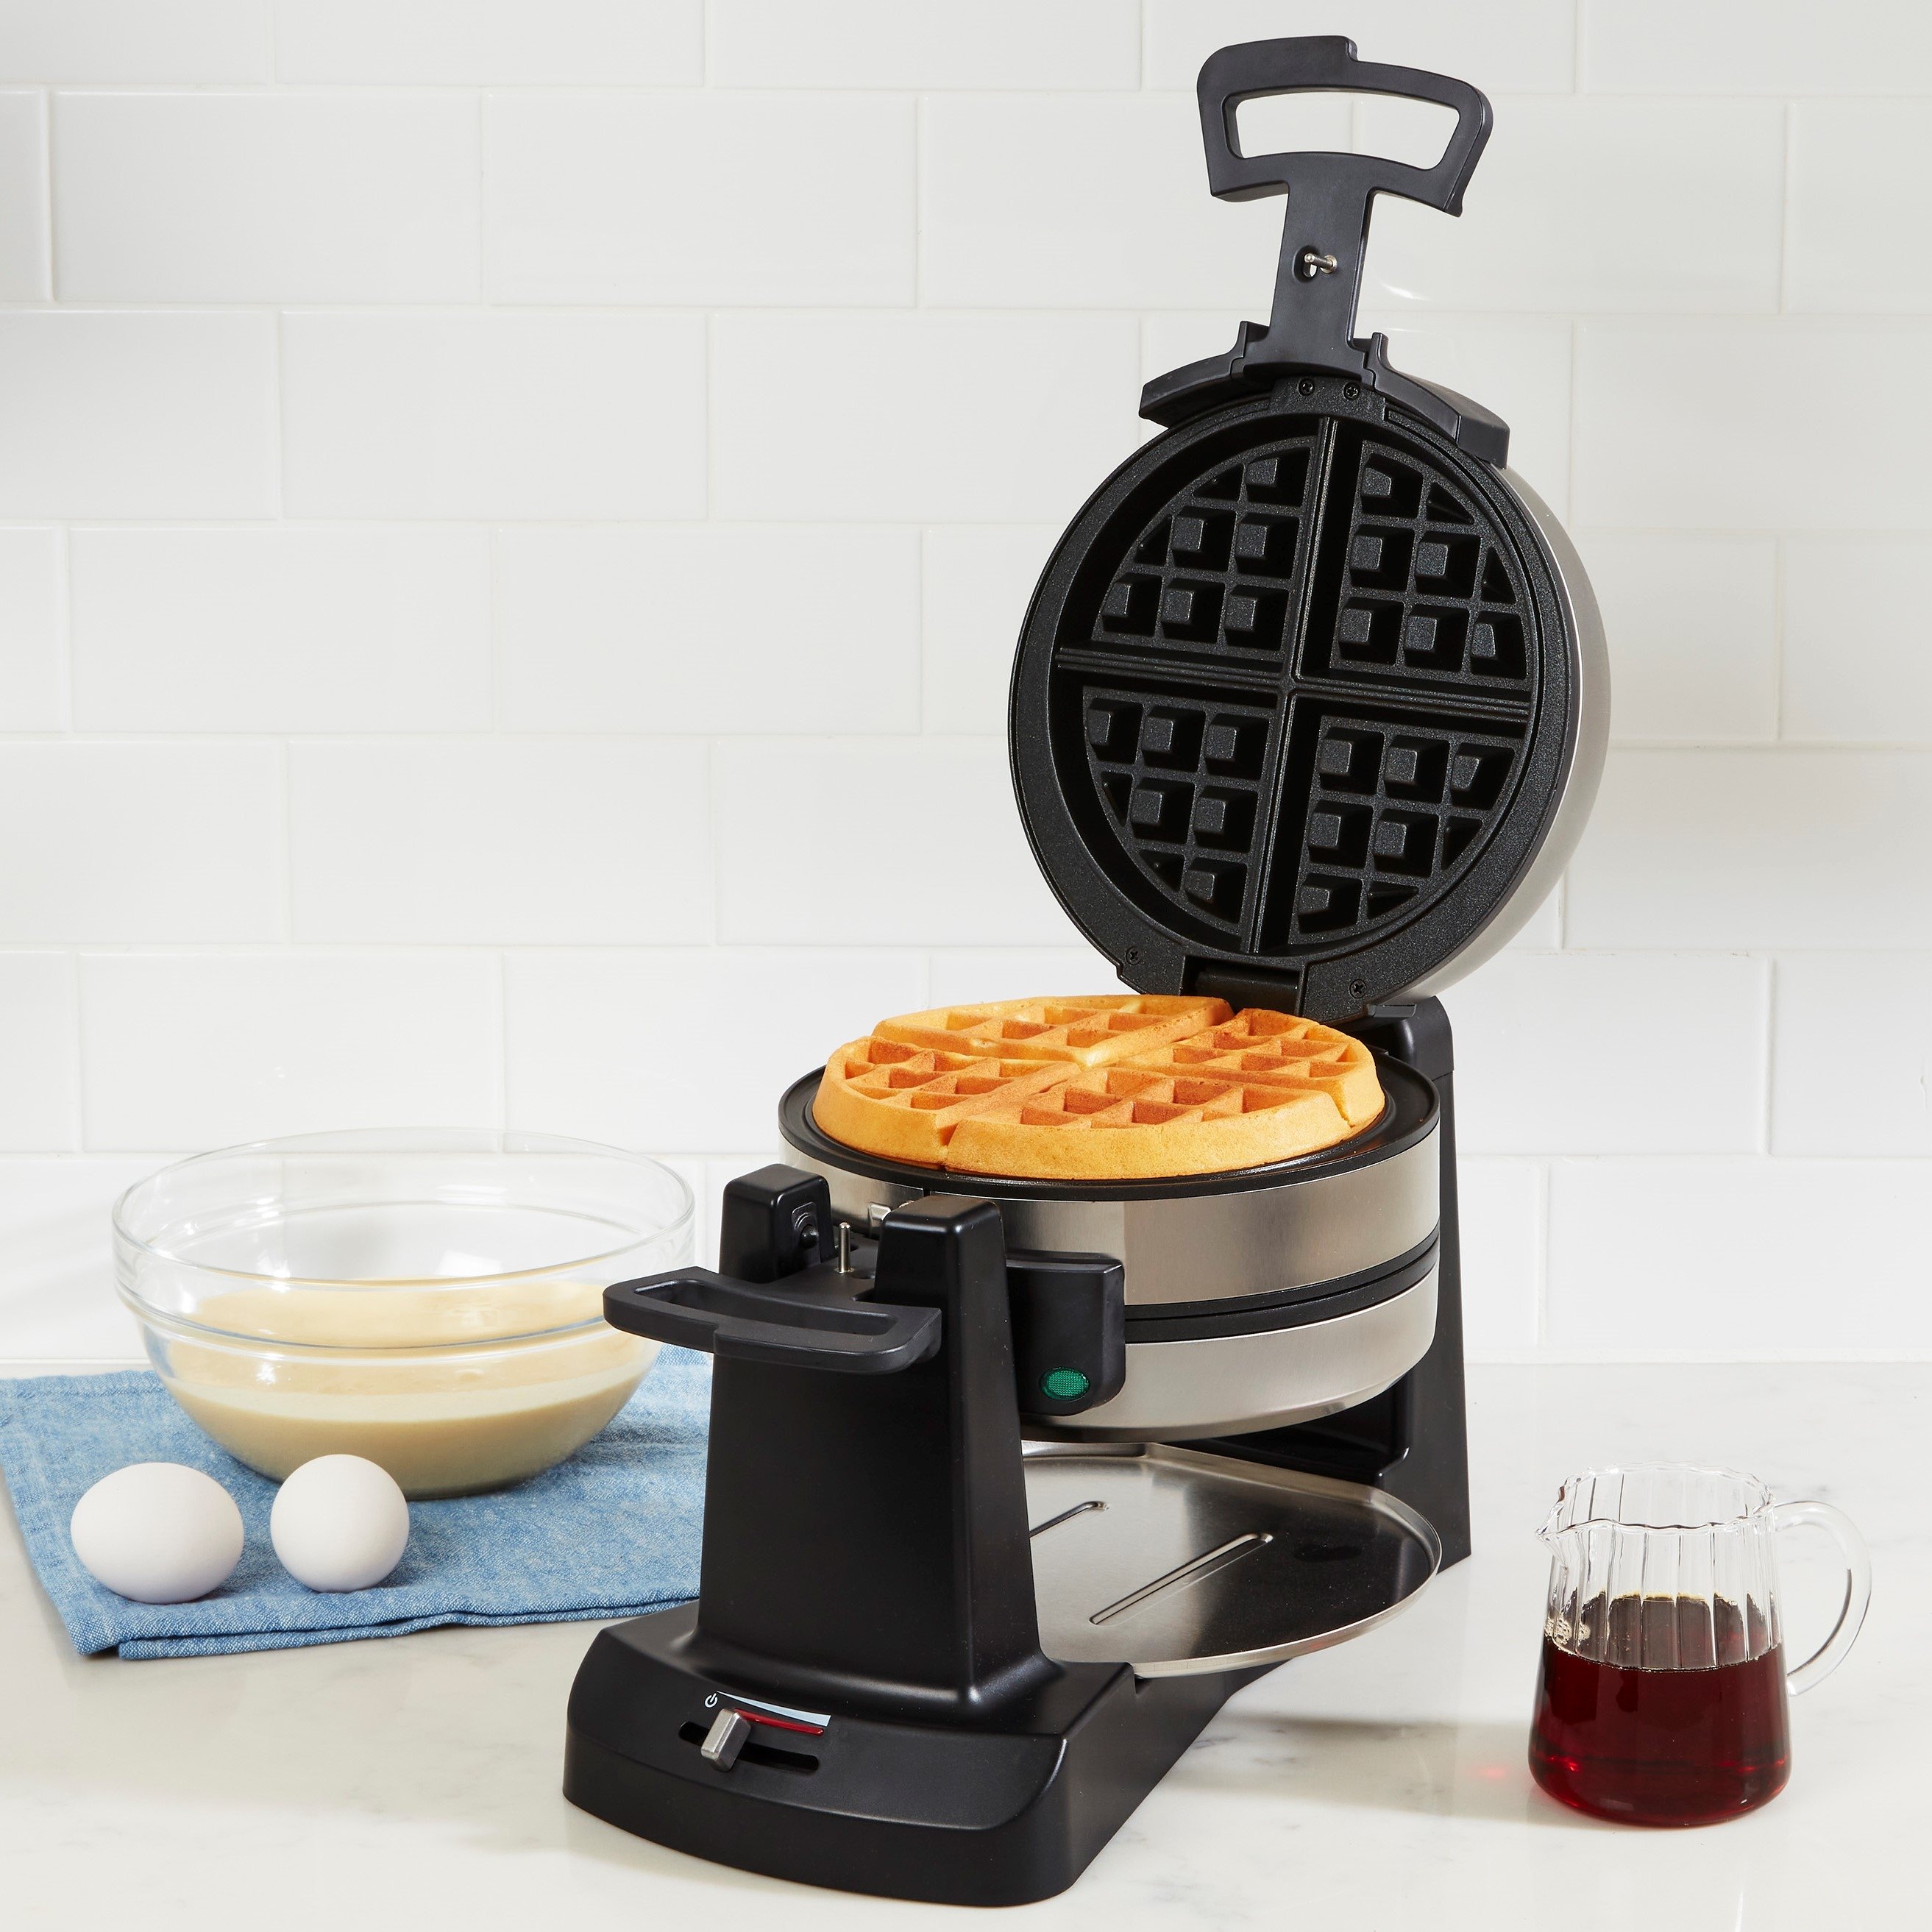 Cuisinart Waffle Makers & Waffle Irons Manuals and Product Help